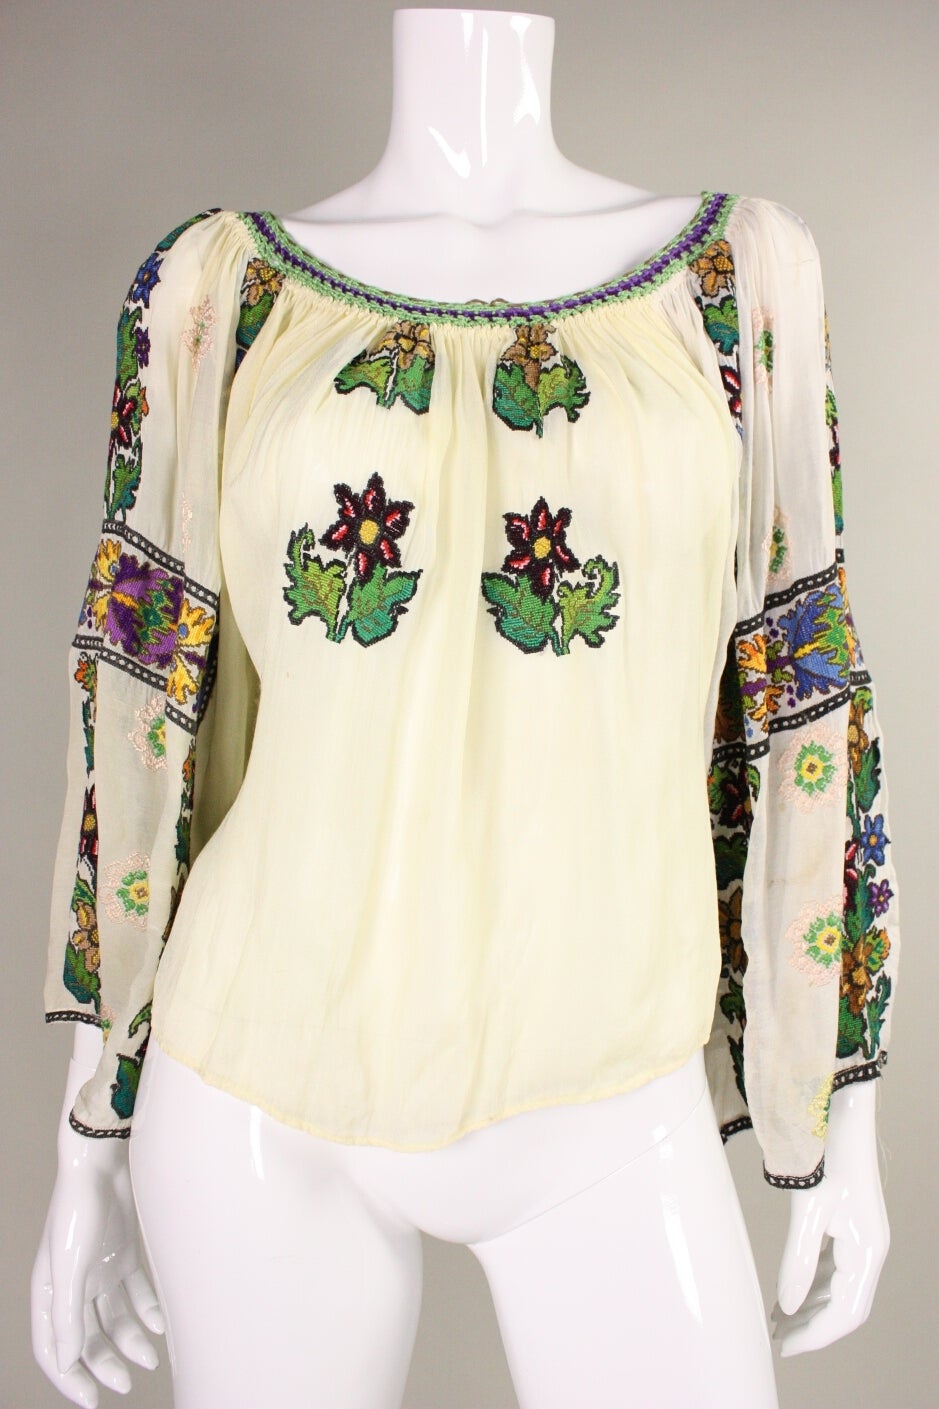 Museum-quality 1930's Eastern European blouse has bold, floral hand-embroidery down the sleeves and on the front of the blouse. Made of a cream-colored cotton gauze.  Unlined.  No closures.

Measurements

Bust: up to 36